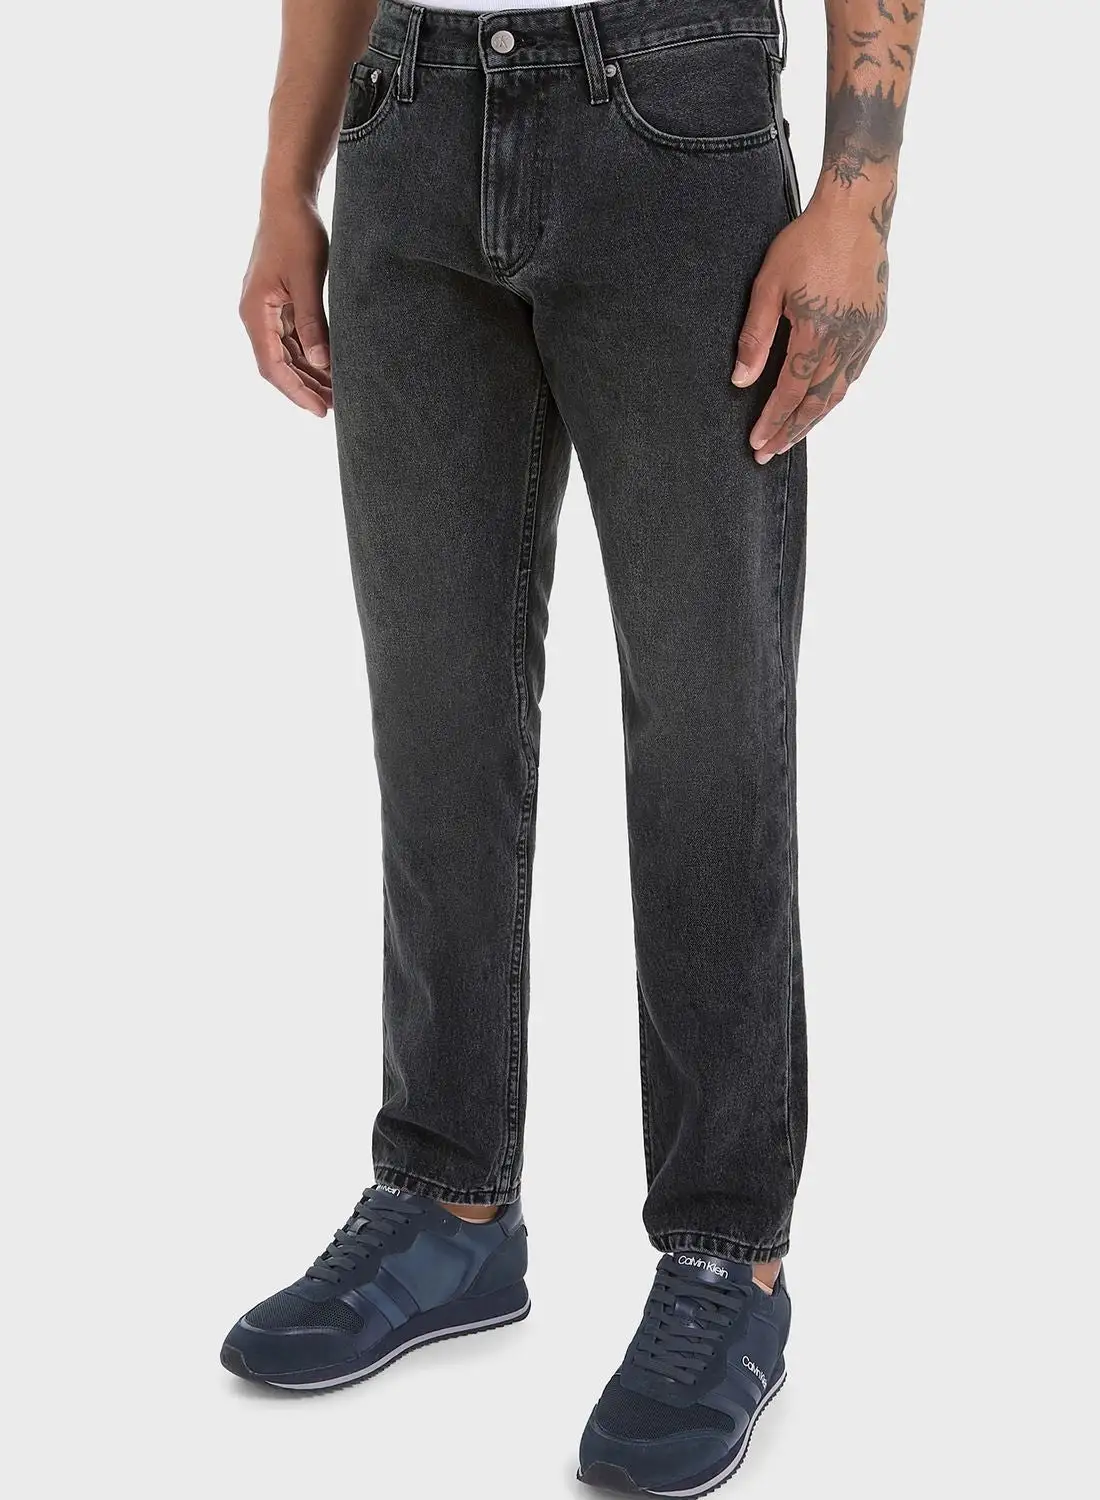 Calvin Klein Jeans Light Wash Straight Fit Jeans